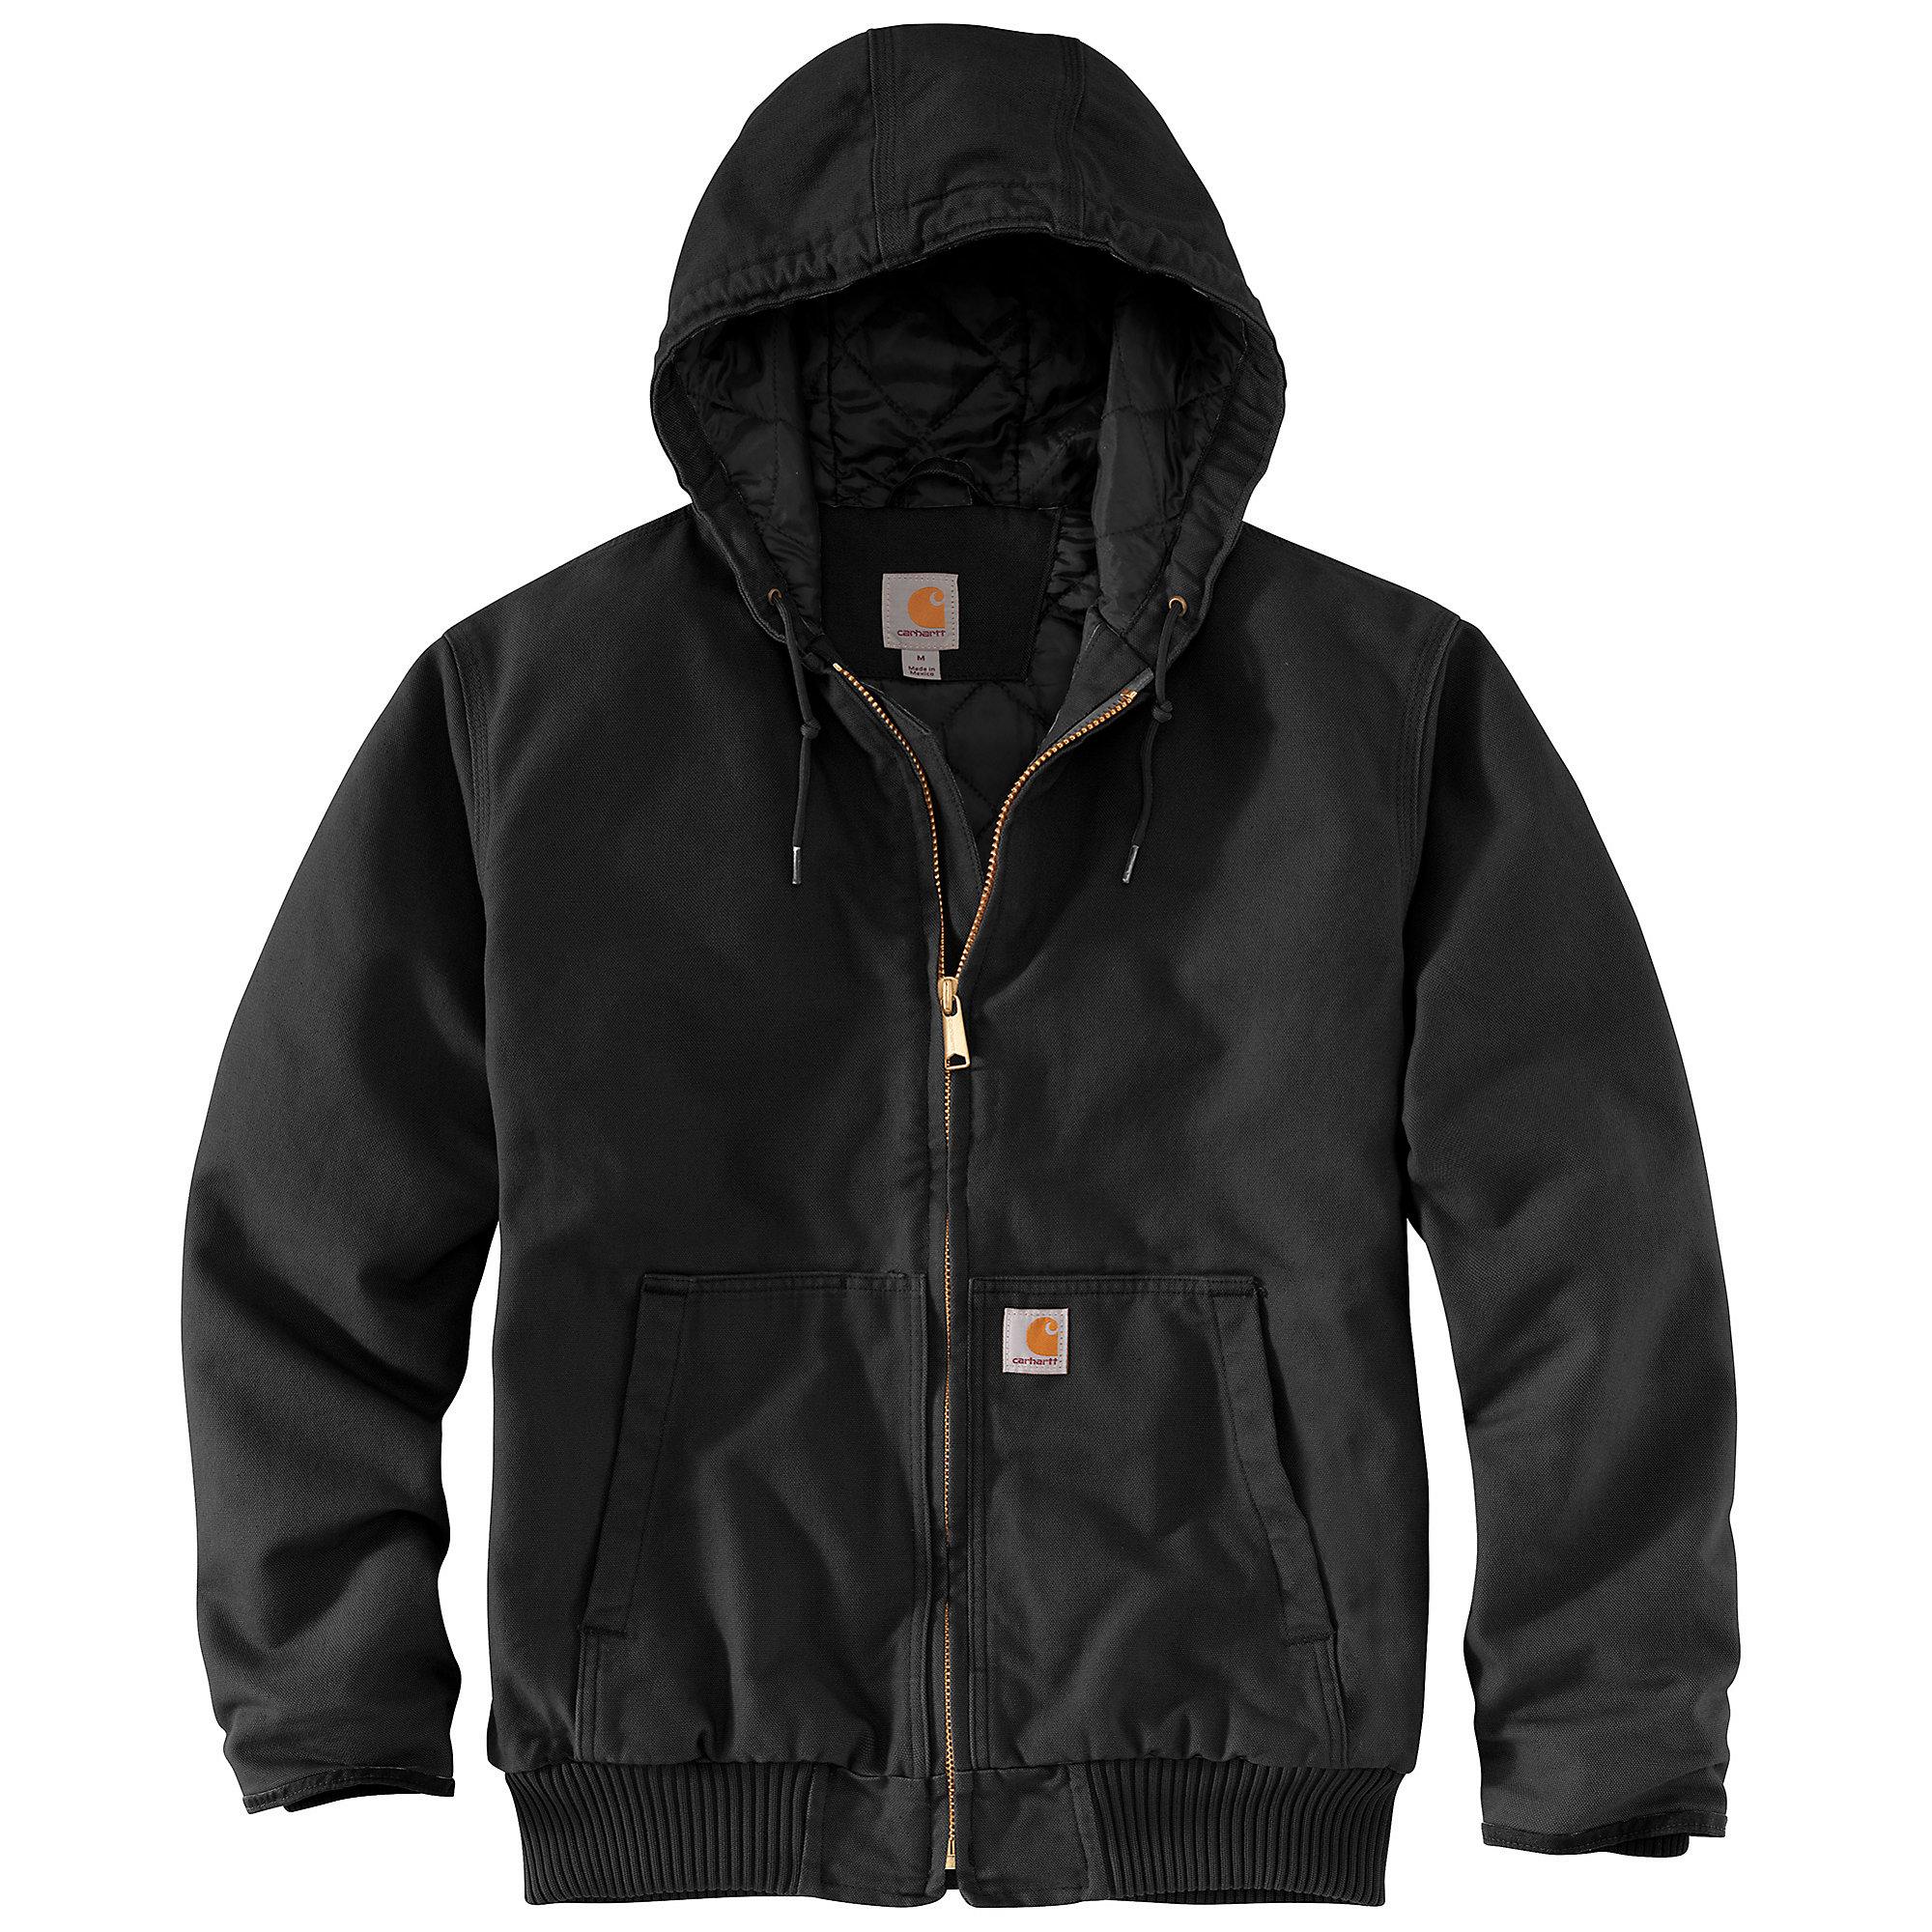 Carhartt Flannel J130 Washed Duck Active Jacket in Black for Men - Lyst